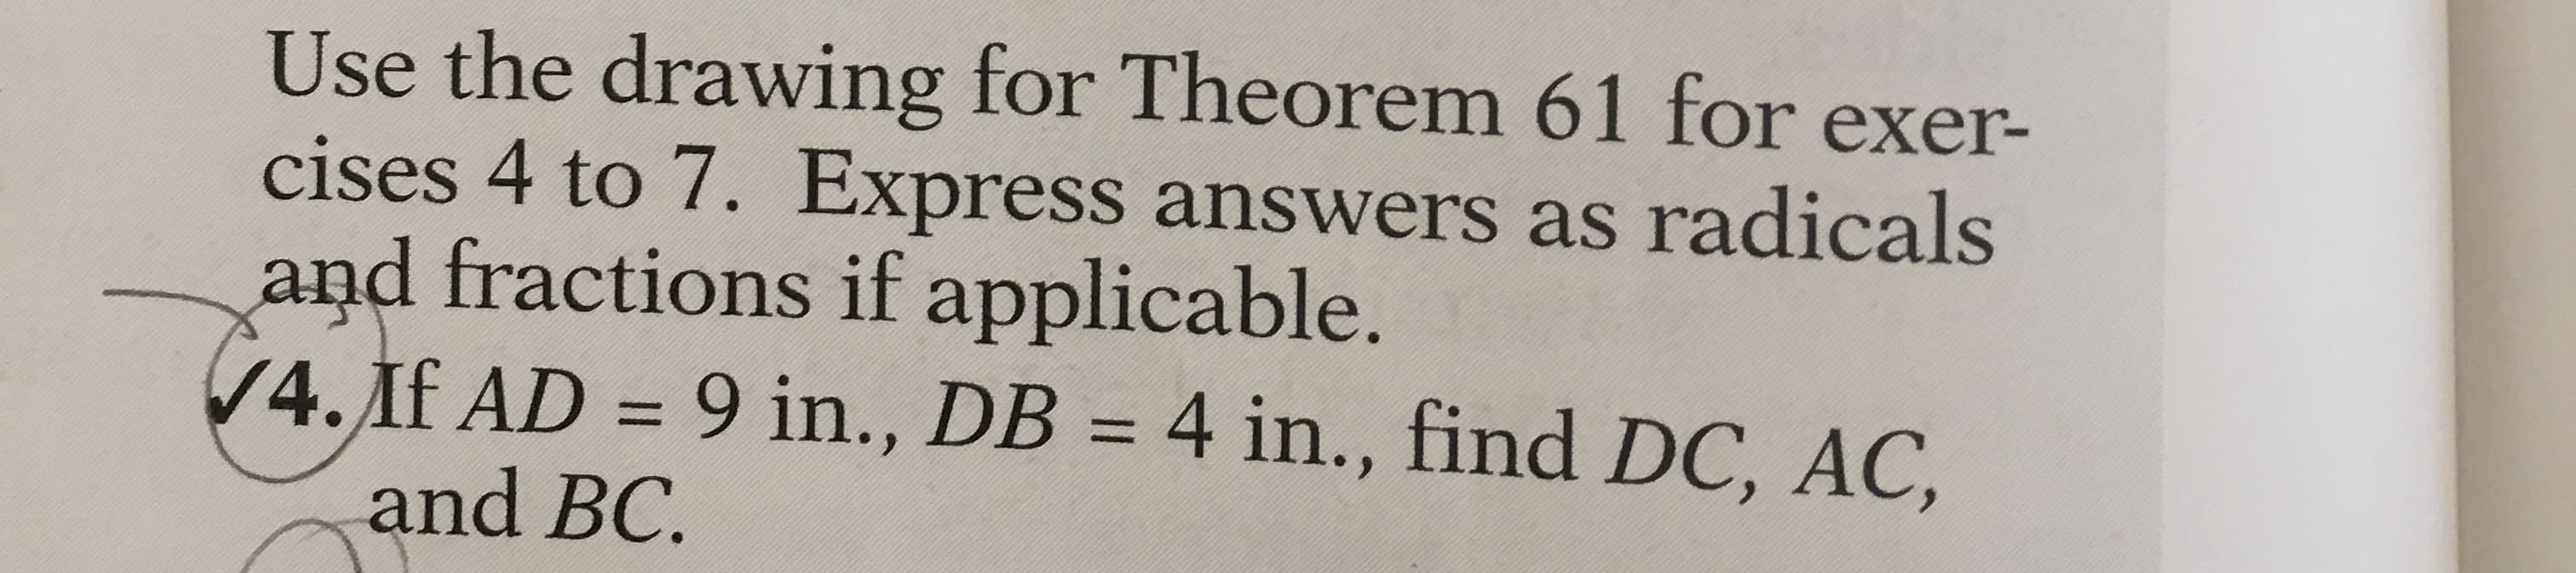 Use the drawing for Theorem 61 for exer-
cises 4 to 7. Express answers as radicals
and fractions if applicable.
V4.If AD = 9 in., DB = 4 in., find DC, AC,
and BC.
%3D
%3D
